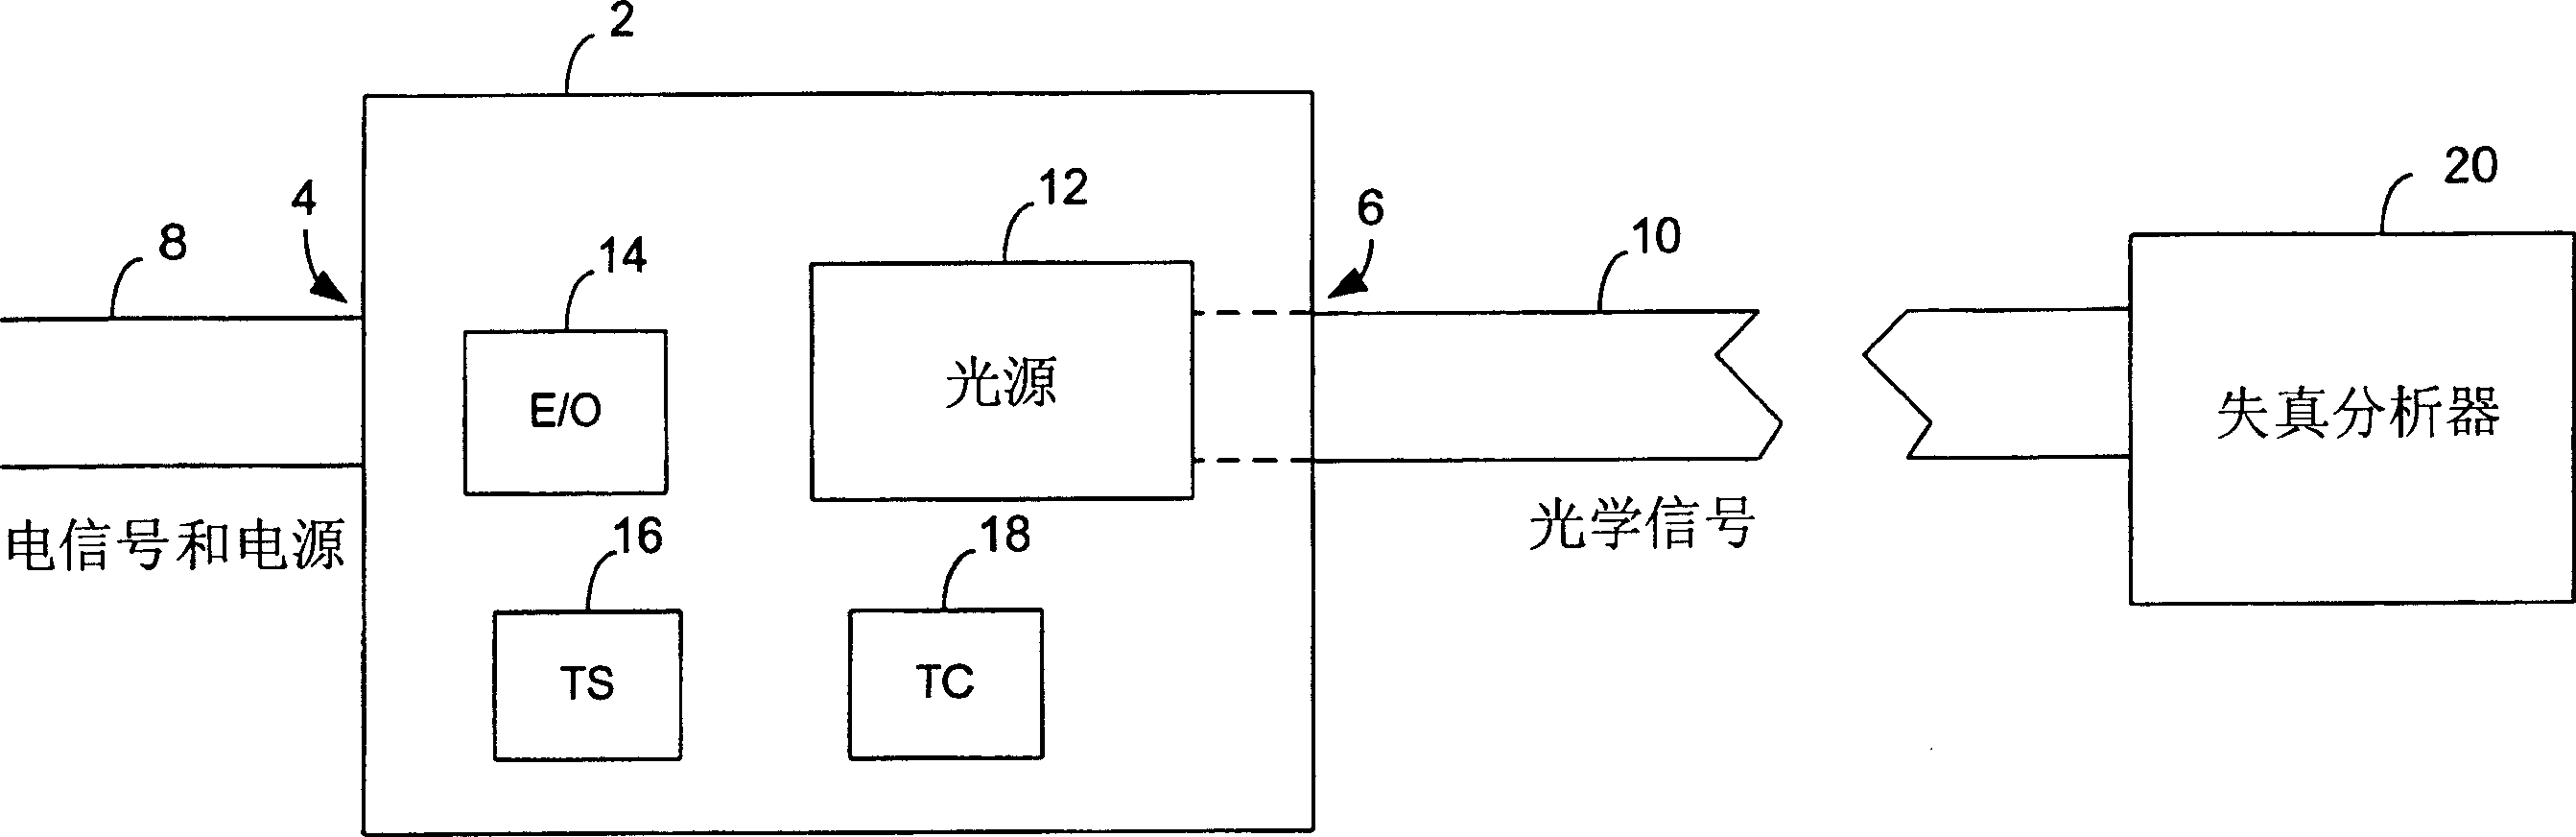 Method and apparatus for distortion control for optical transmitters